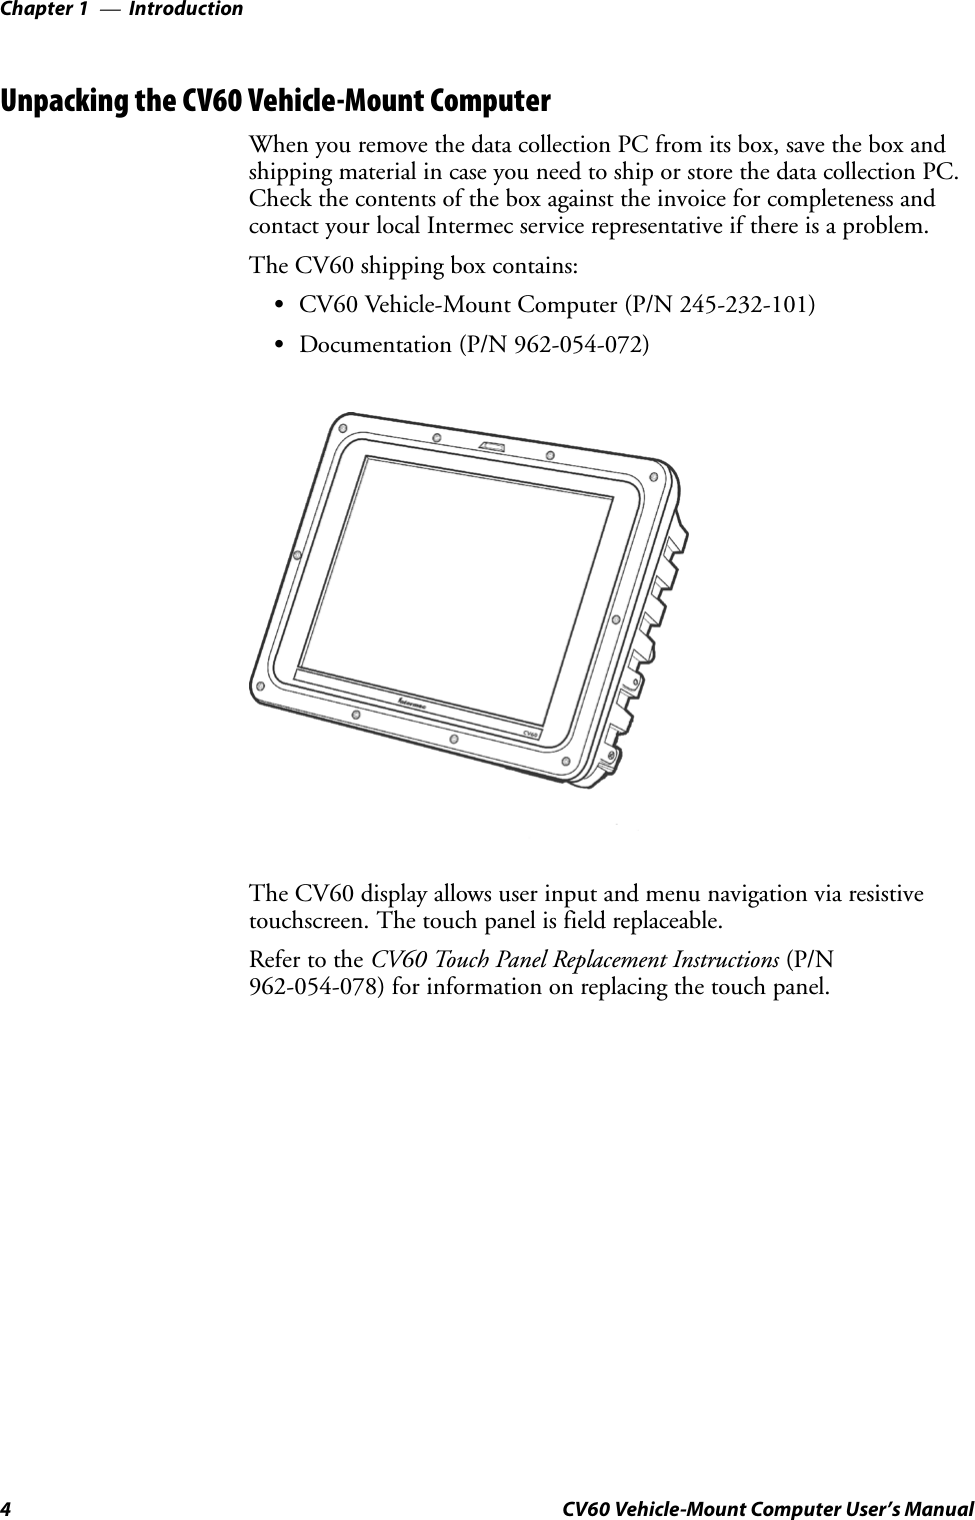 IntroductionChapter —14 CV60 Vehicle-Mount Computer User’s ManualUnpacking the CV60 Vehicle-Mount ComputerWhen you remove the data collection PC from its box, save the box andshipping material in case you need to ship or store the data collection PC.Check the contents of the box against the invoice for completeness andcontact your local Intermec service representative if there is a problem.The CV60 shipping box contains:SCV60 Vehicle-Mount Computer (P/N 245-232-101)SDocumentation (P/N 962-054-072)The CV60 display allows user input and menu navigation via resistivetouchscreen. The touch panel is field replaceable.Refer to the CV60 Touch Panel Replacement Instructions (P/N962-054-078) for information on replacing the touch panel.